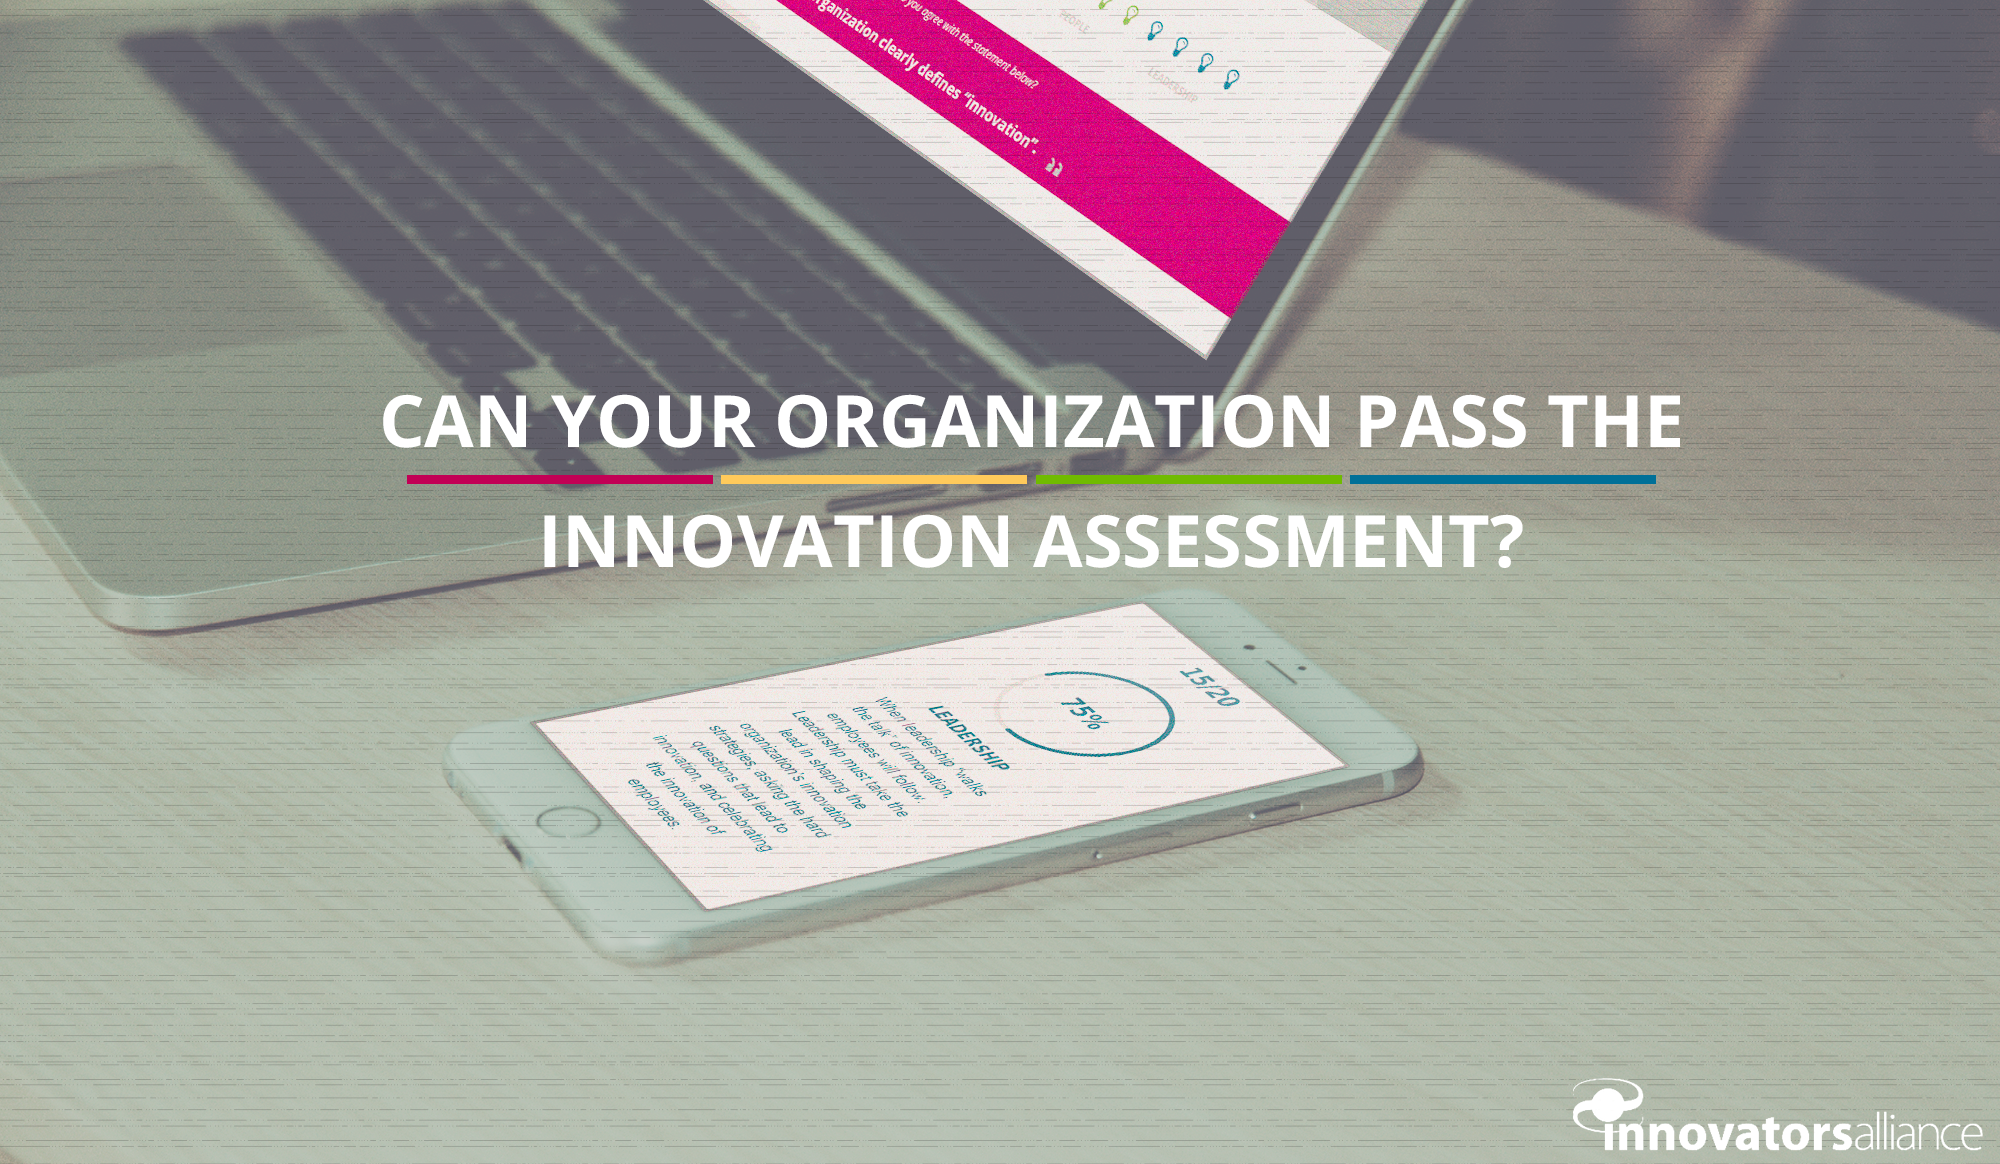 Check Out Our NEW “Innovation Self-Assessment”!